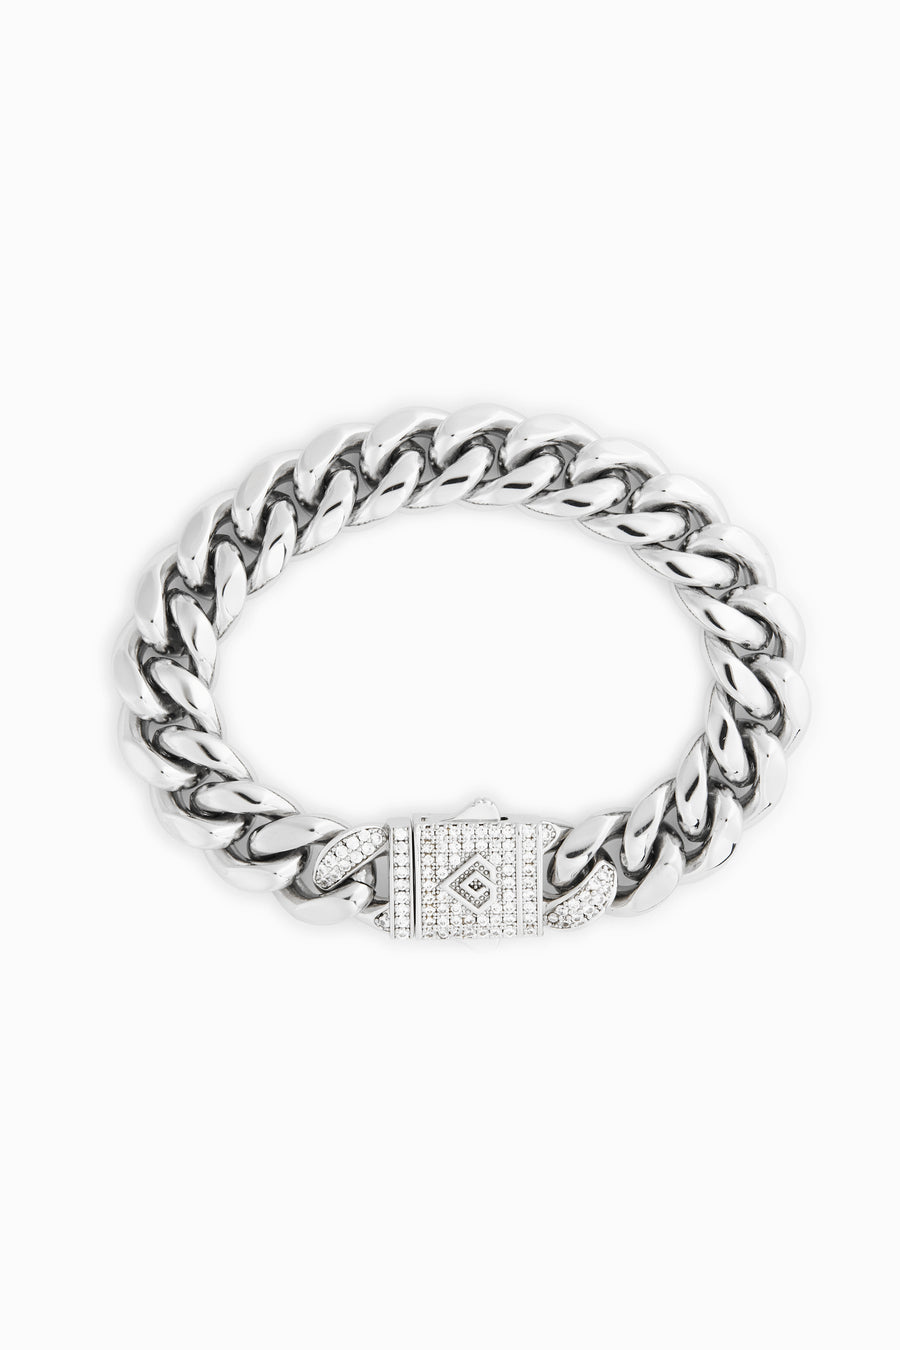 Cuban Bracelet With Iced Clasp 12mm